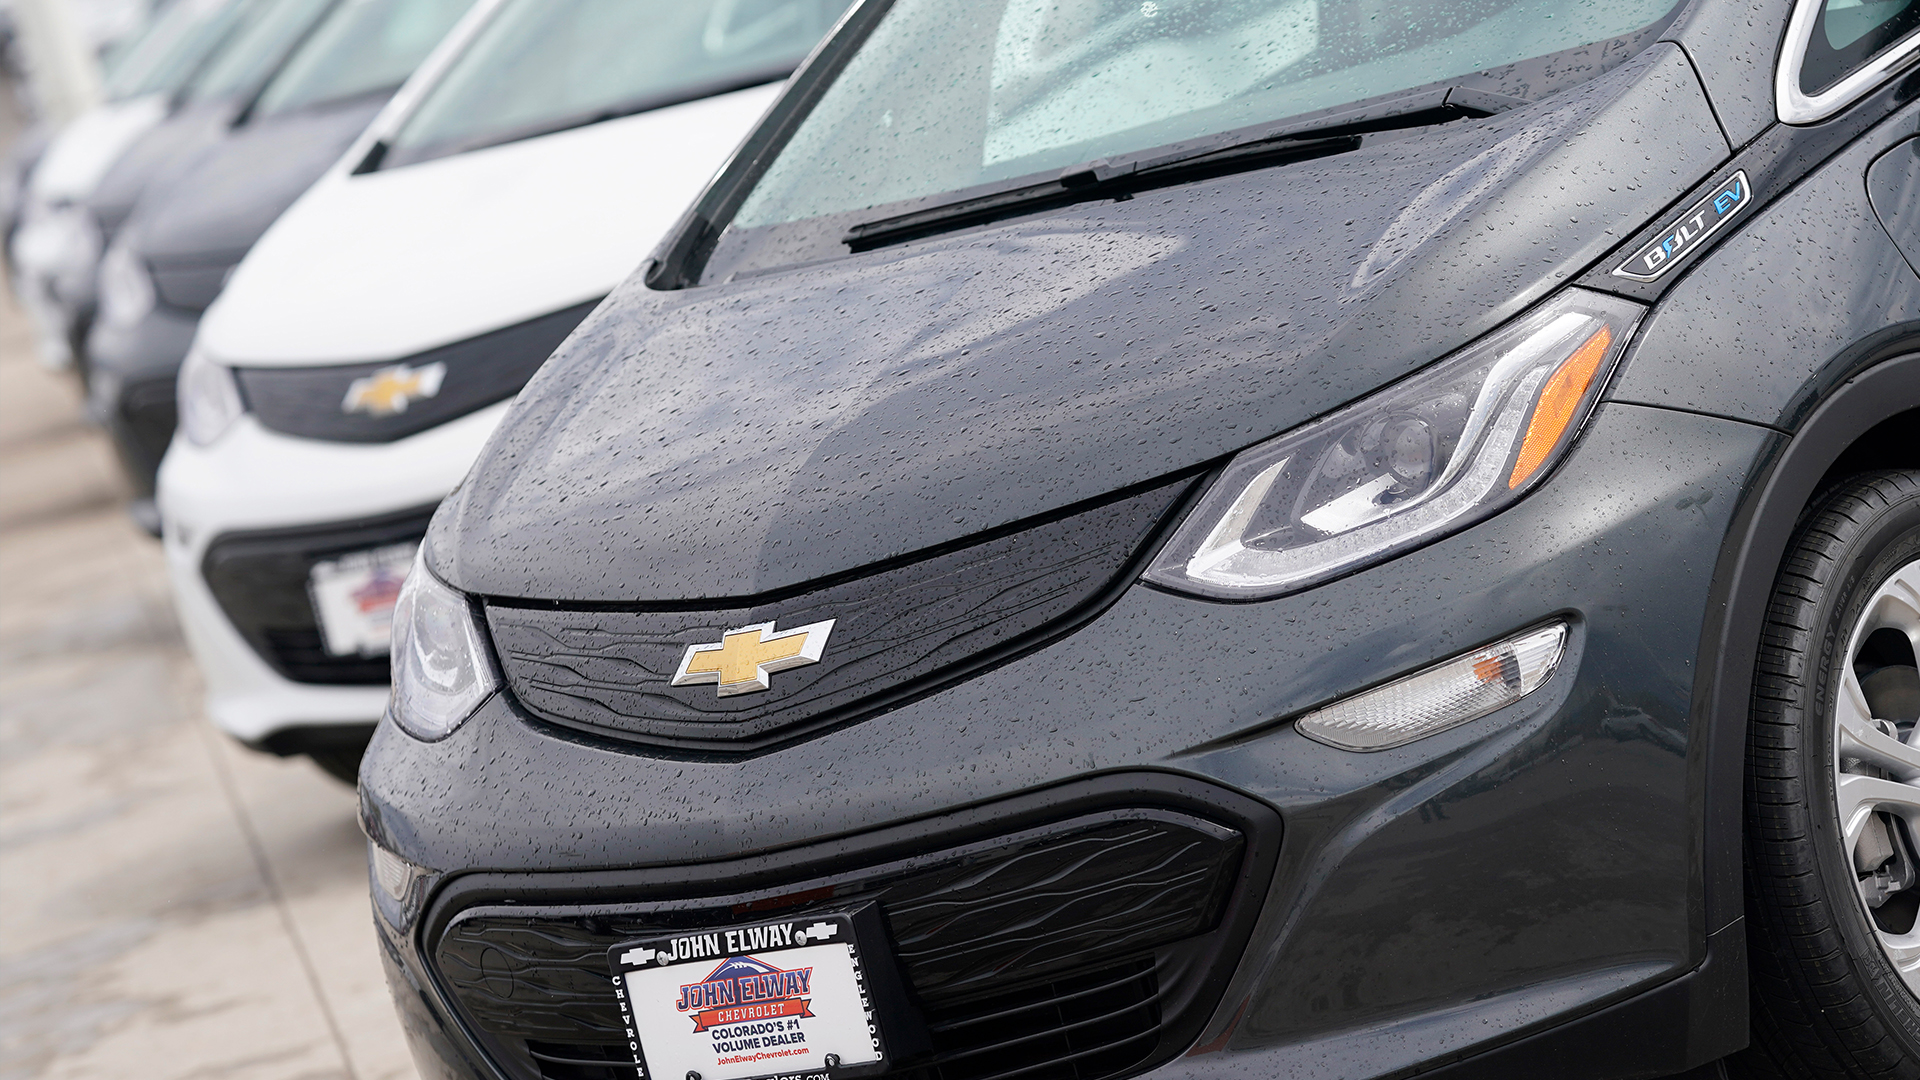 Shortage of EV chargers leaves Chevy Bolts sitting unused in parking lot after being discontinued by General Motors [Video]